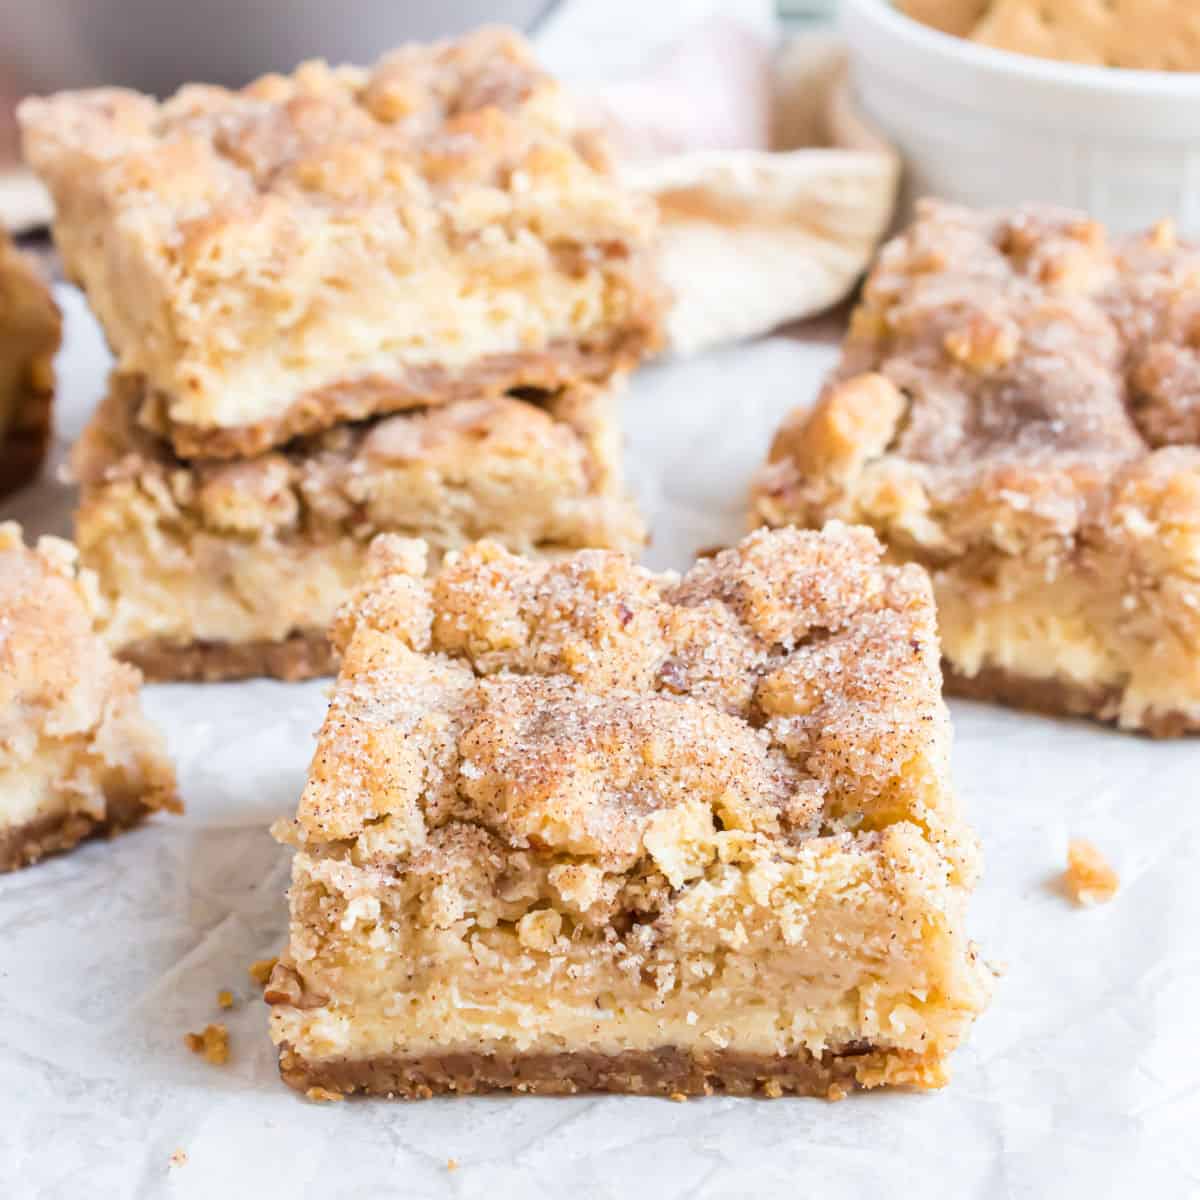 Snickerdoodle Cheesecake Bars are like cookies and cheesecake in one! A homemade graham cracker crust is topped with a creamy cheesecake layer and snickerdoodle cookie dough in this sweet and salty recipe.